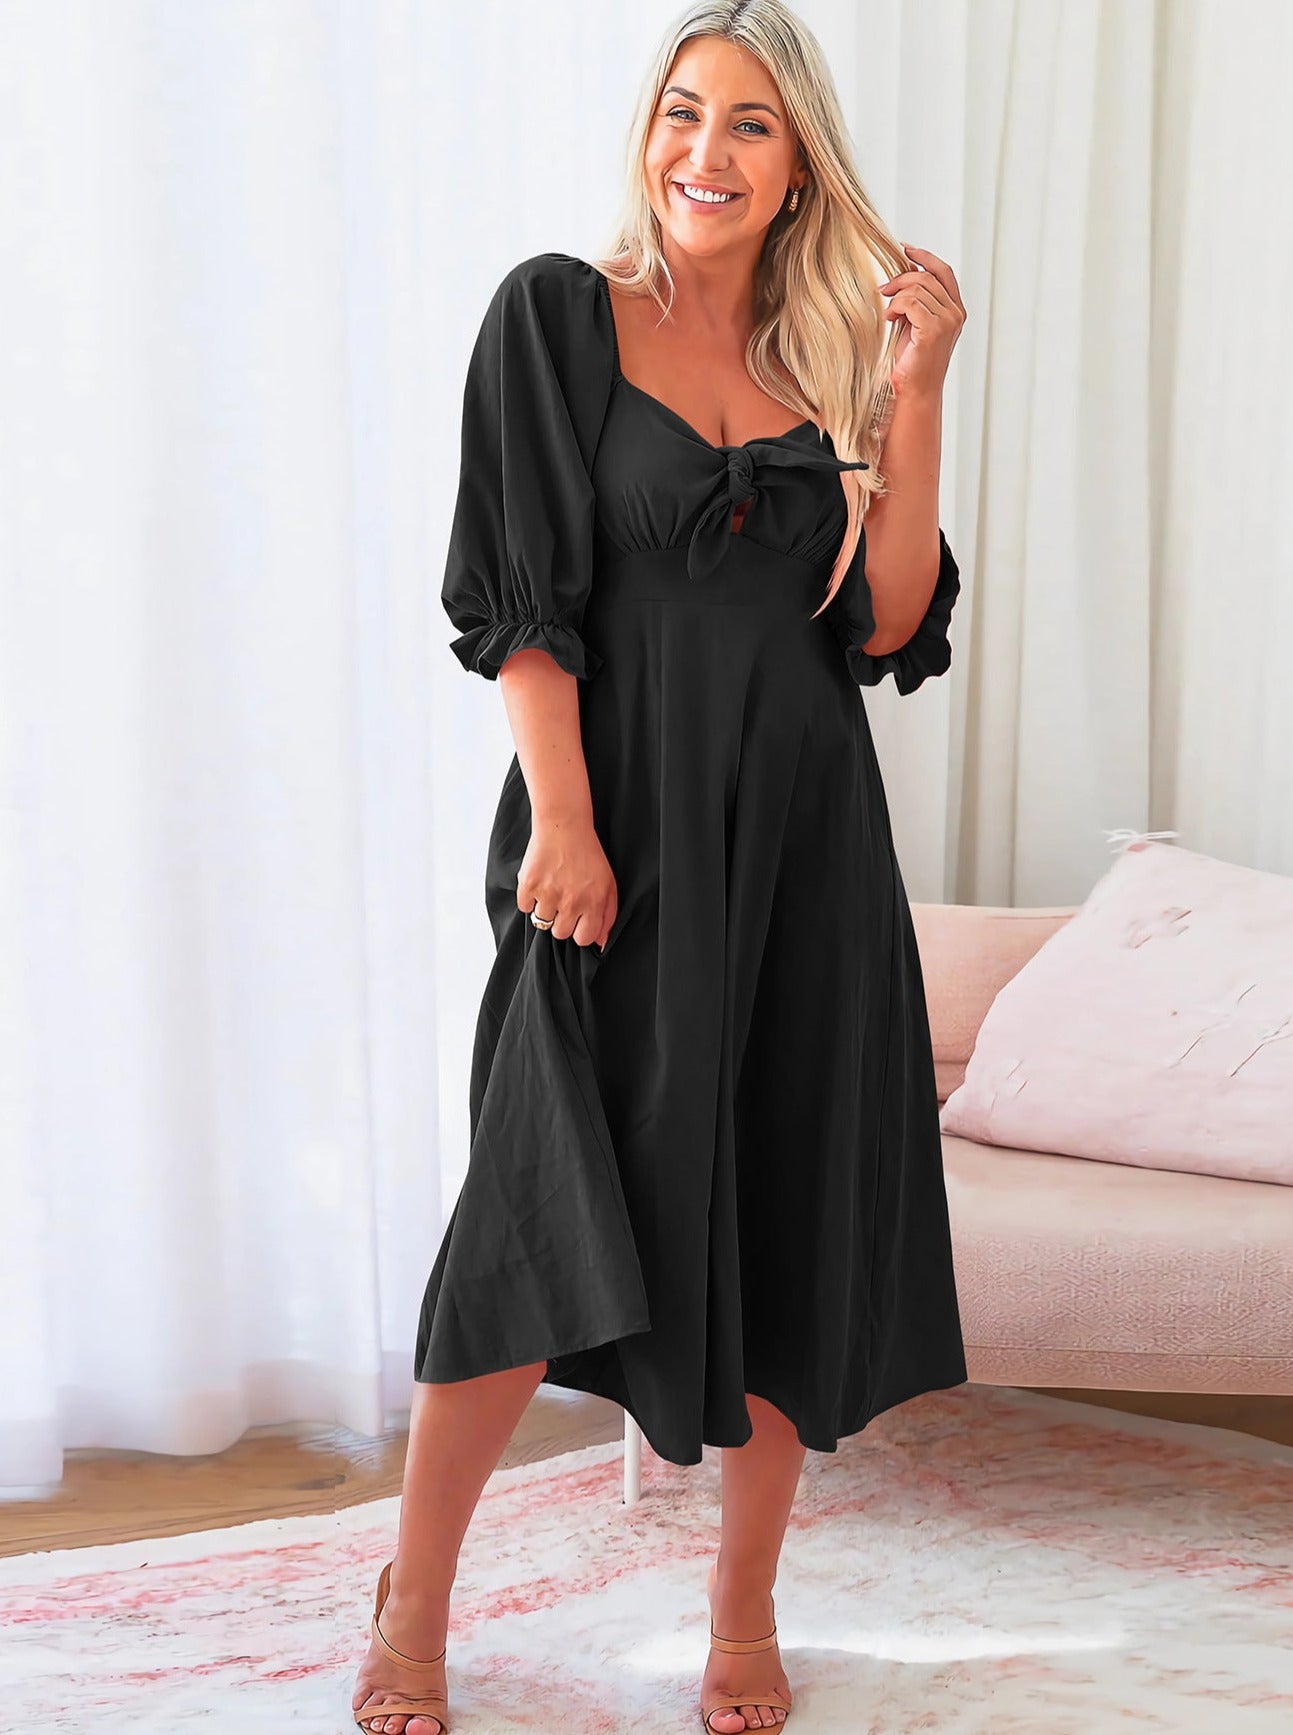 Square Neck Knotted Puff Sleeves Cutout Casual Summer Dress